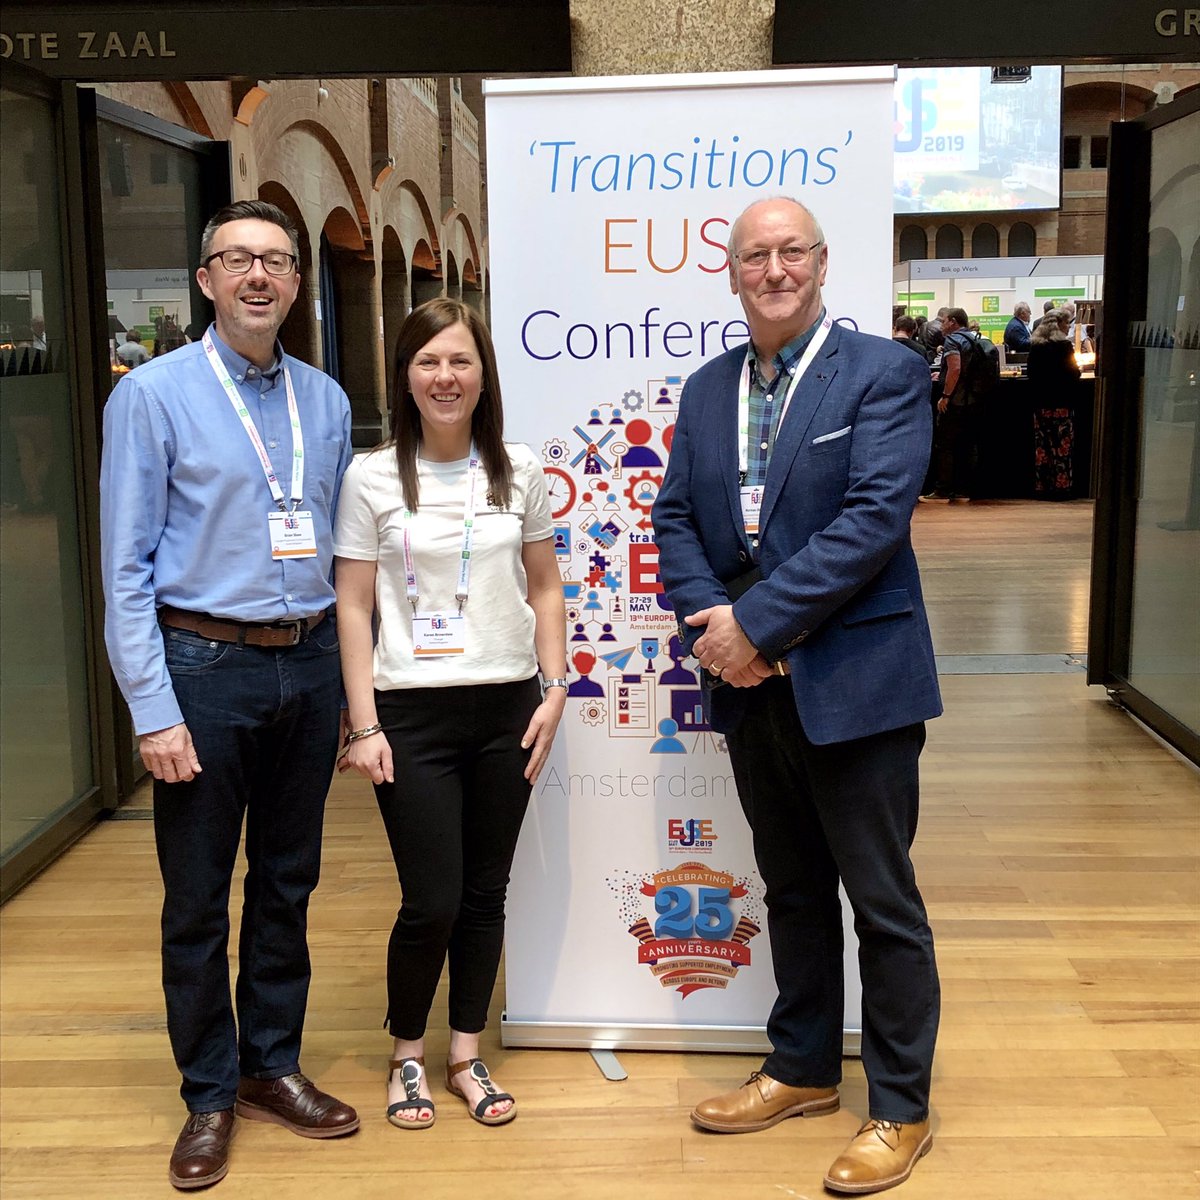 Good morning from the @2019Euse conference in Amsterdam #EUSE2019 #SupportedEmployment #amsterdam @BeursVanBerlage @TriangleHousing @niuse_tweets